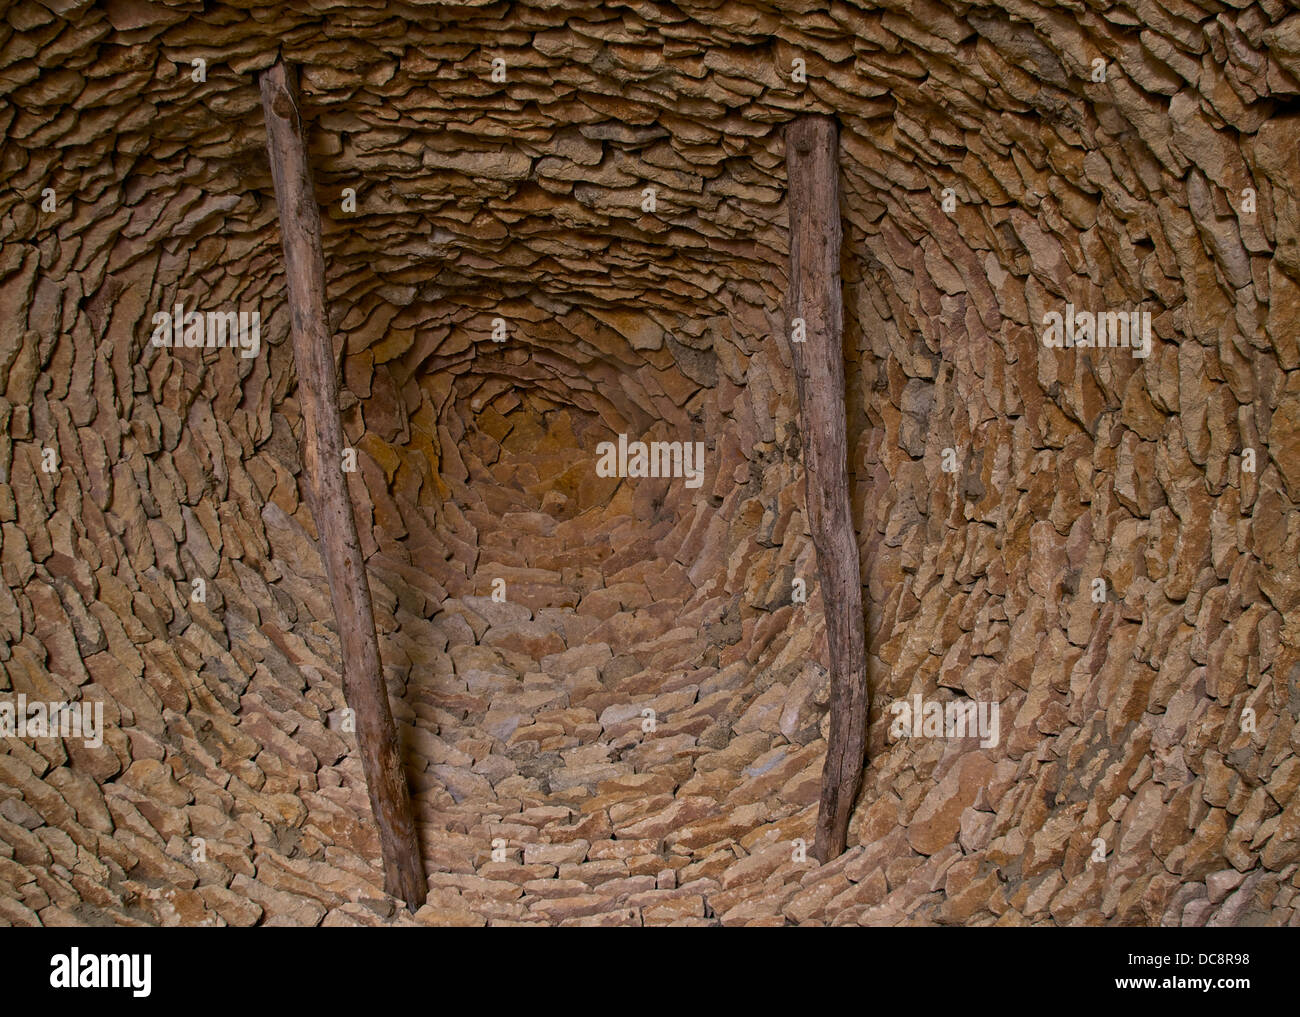 Inside of a Cabane du Breuil, view of the cantilevered corbeled dome vault, made with flat stones in limestone, called 'Lauzes'. Stock Photo